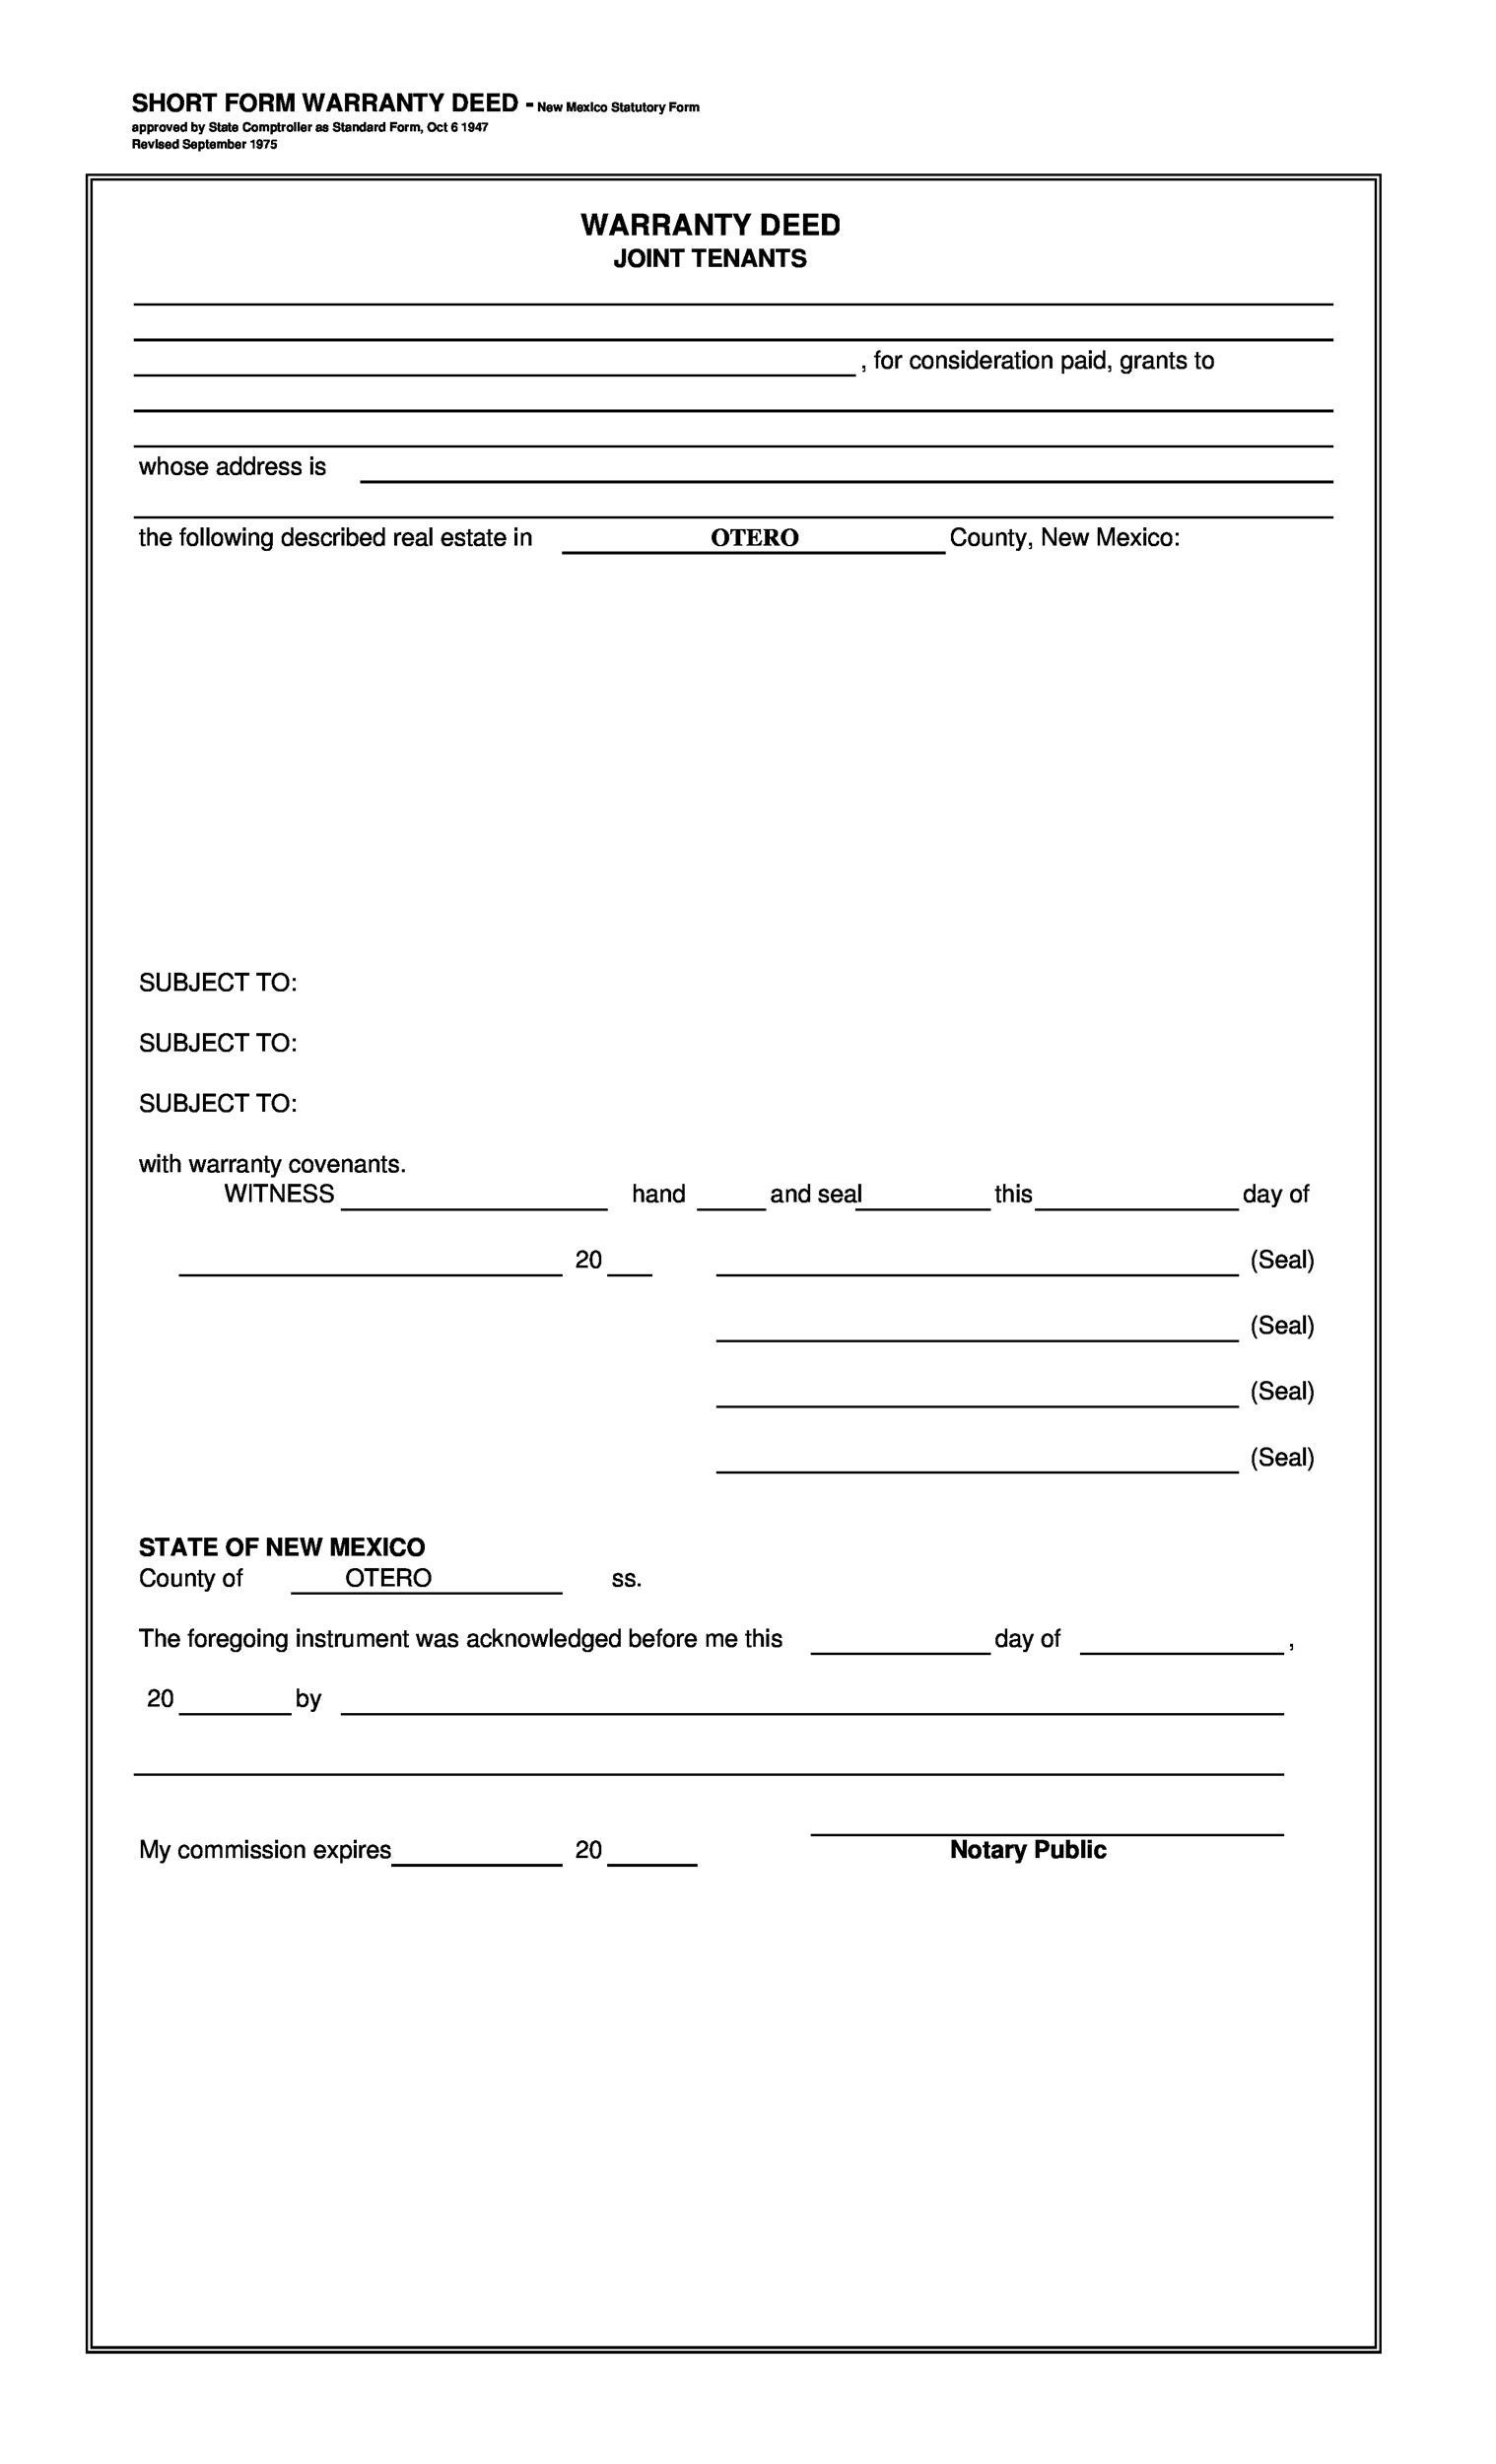 printable-warranty-deed-forms-printable-forms-free-online